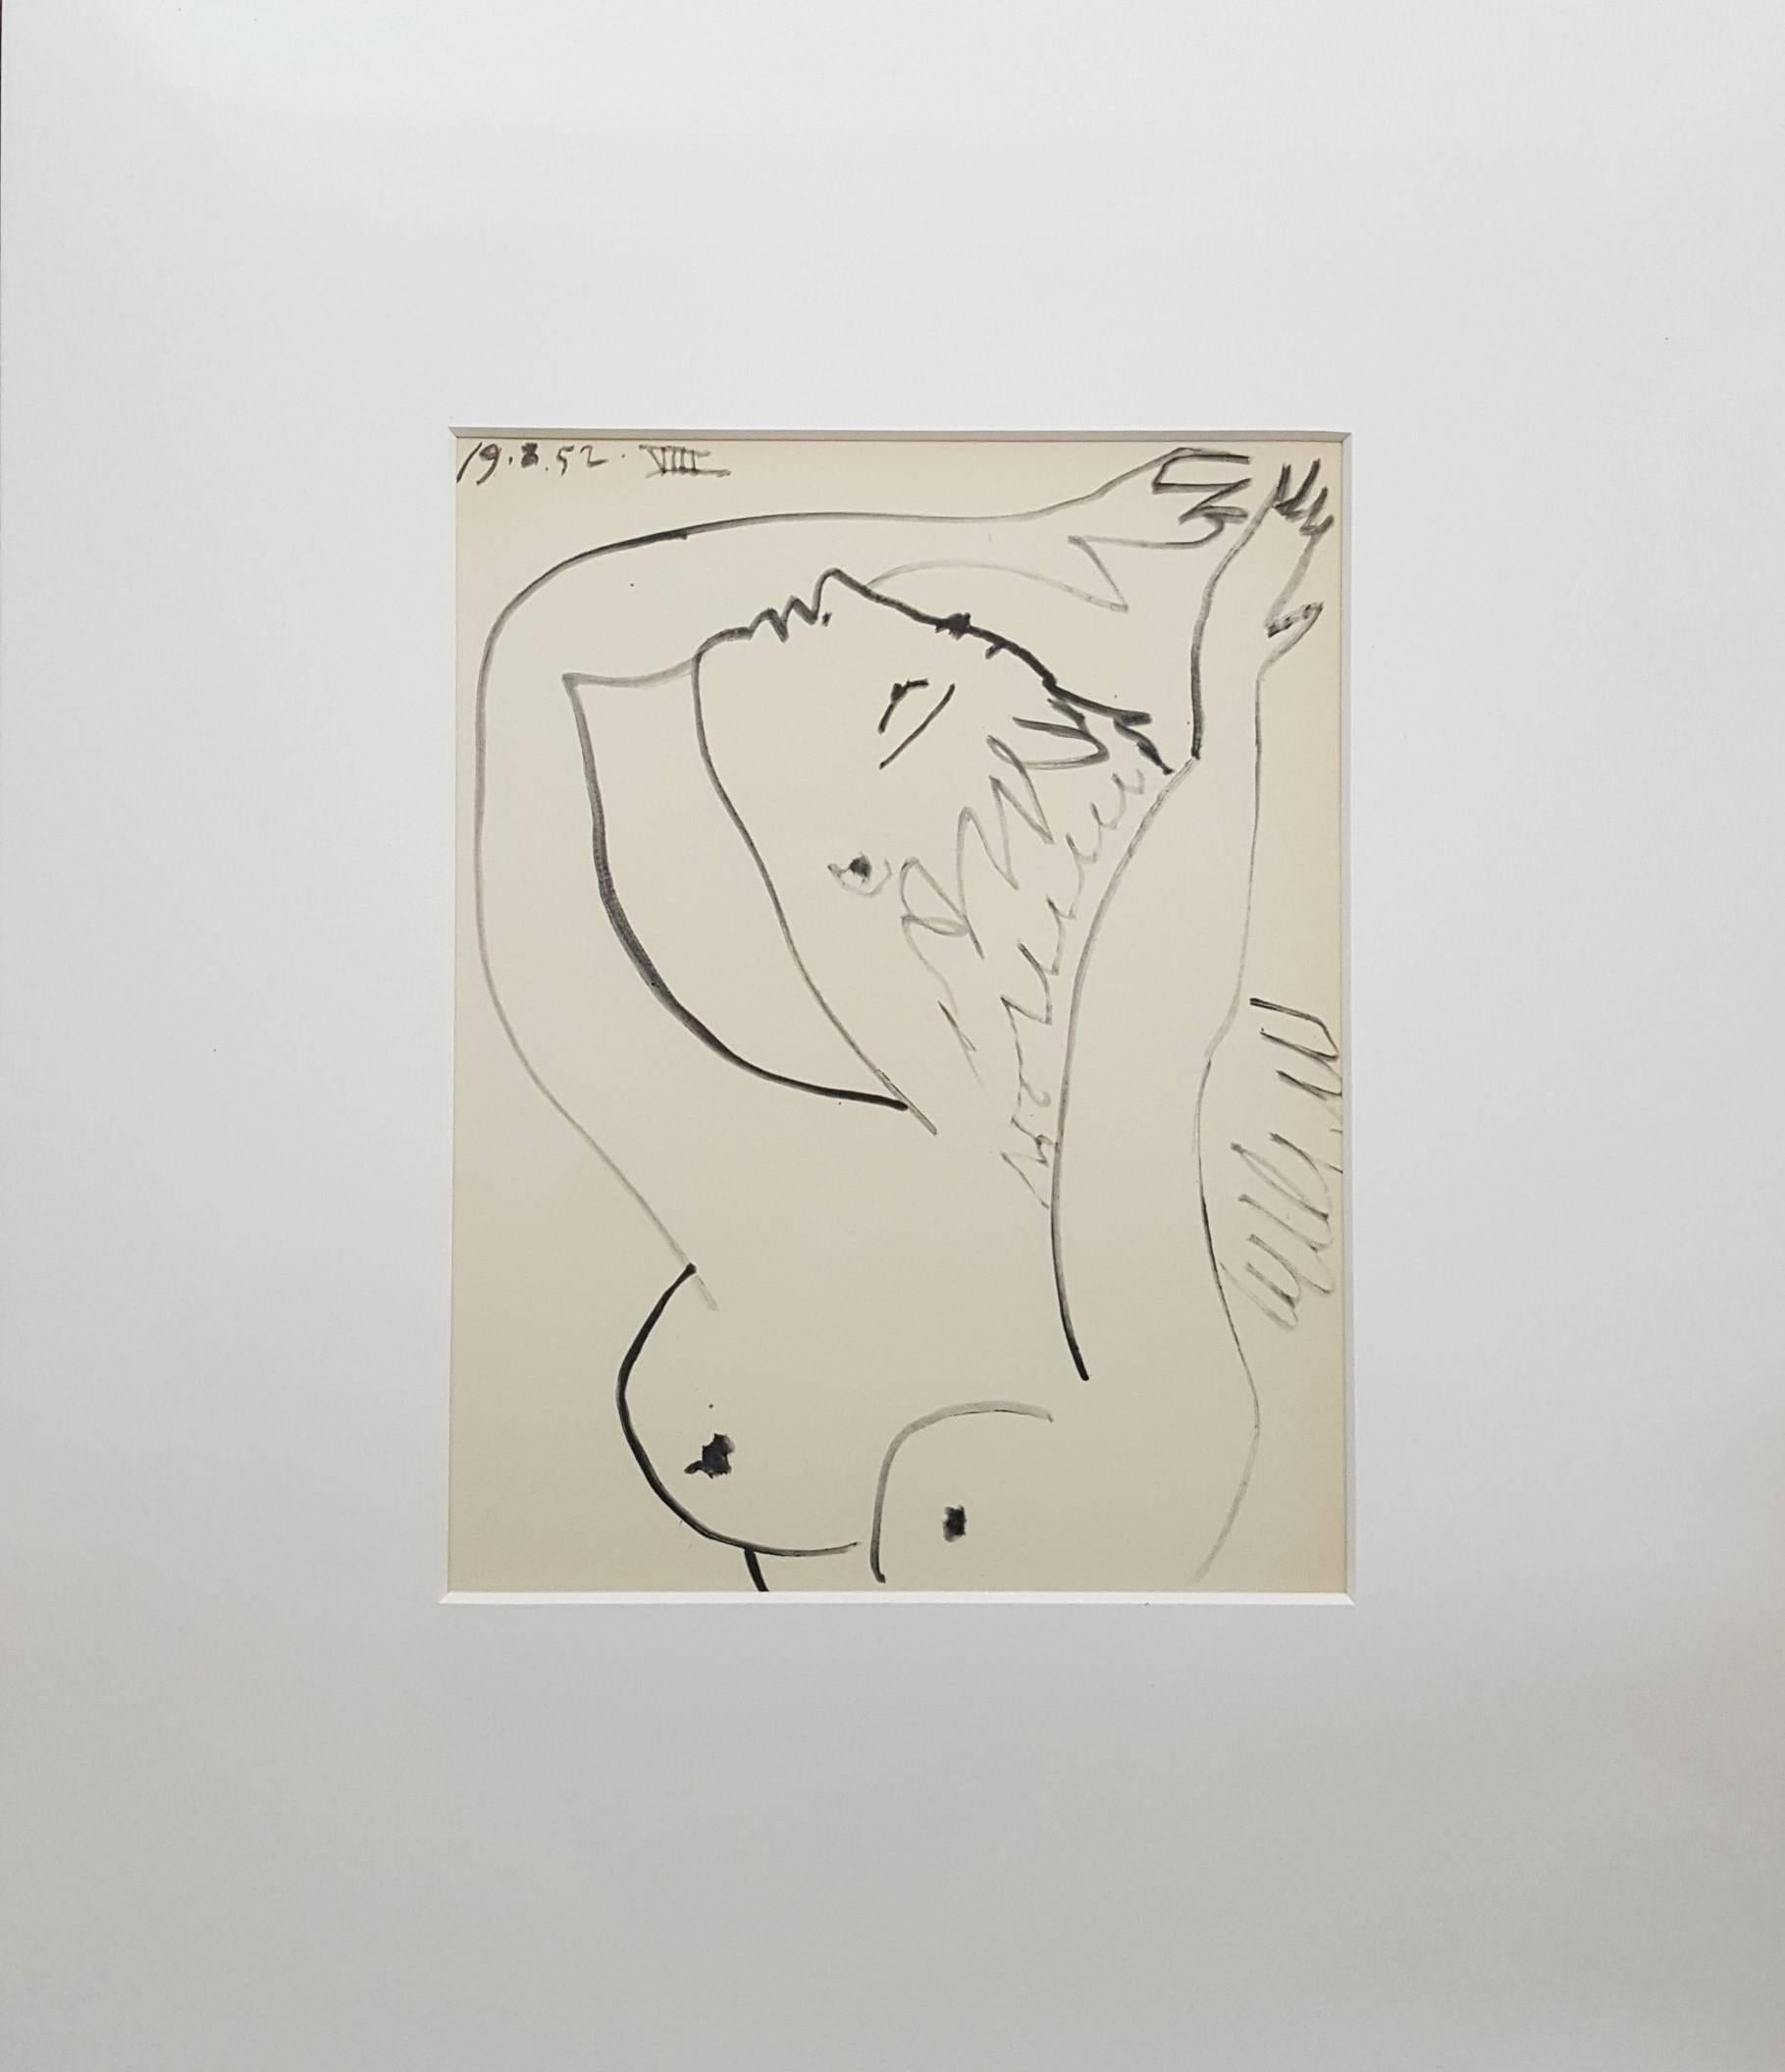 La Comedie Humaine - Print by (after) Pablo Picasso